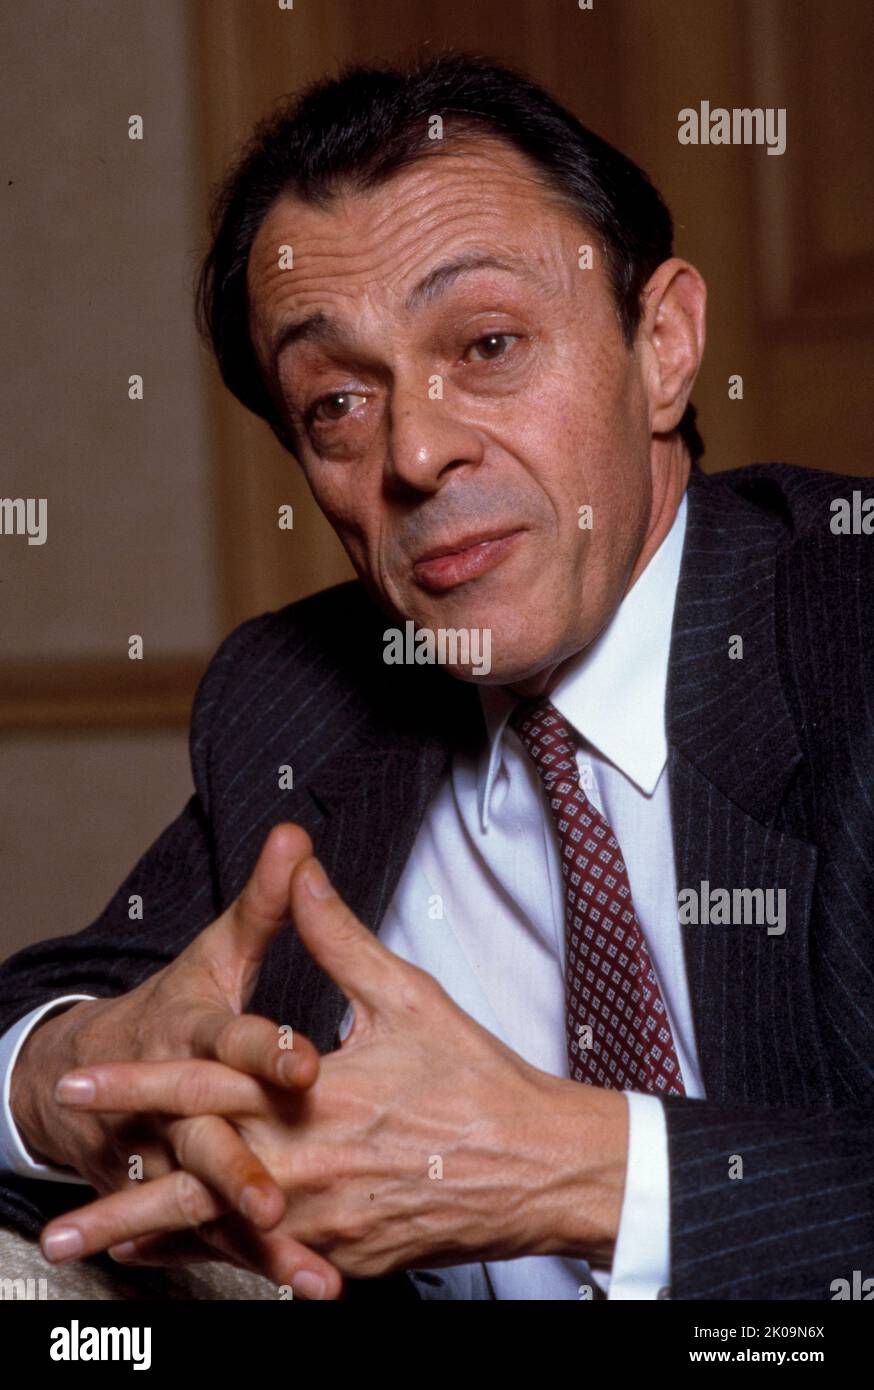 Michel Rocard (1930 - 2016) French politician and a member of the Socialist Party (PS). He served as Prime Minister under Francois Mitterrand from 1988 to 1991, during which he created the Revenu minimum d'insertion (RMI), a social minimum welfare program for indigents, and achieved the Matignon Accords regarding the status of New Caledonia. He was a member of the European Parliament, and was strongly involved in European policies until 2009. Stock Photo